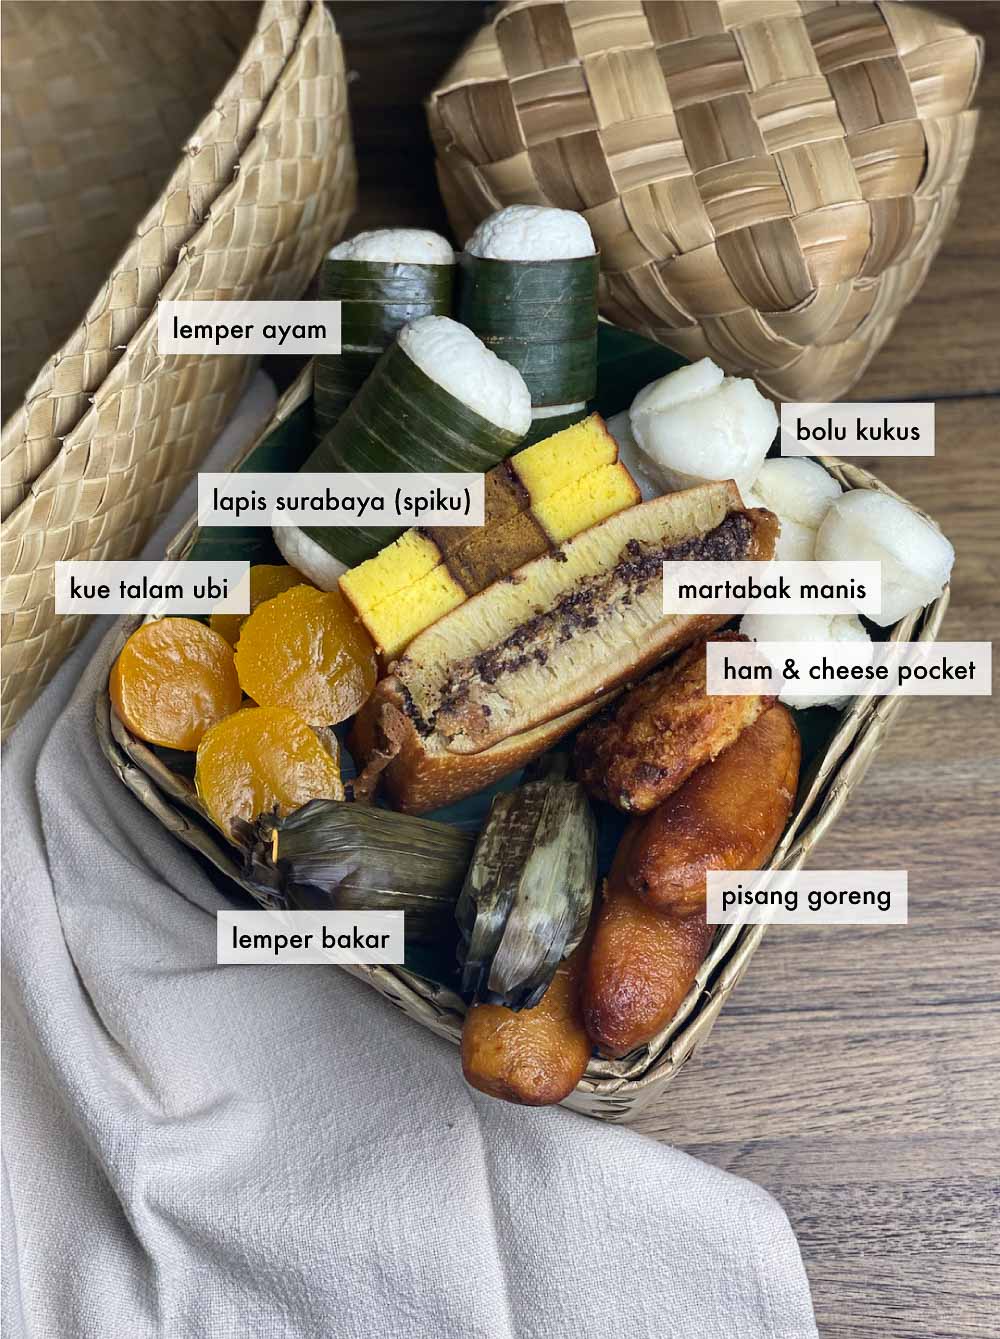 Take your snack spread to a whole new level with jajanan pasar (Indonesian charcuterie spread). A charcuterie board is more than assorted cheese and cured meat, and this one will be your new favorite! Get a crash course on homemade Indonesian snacks.